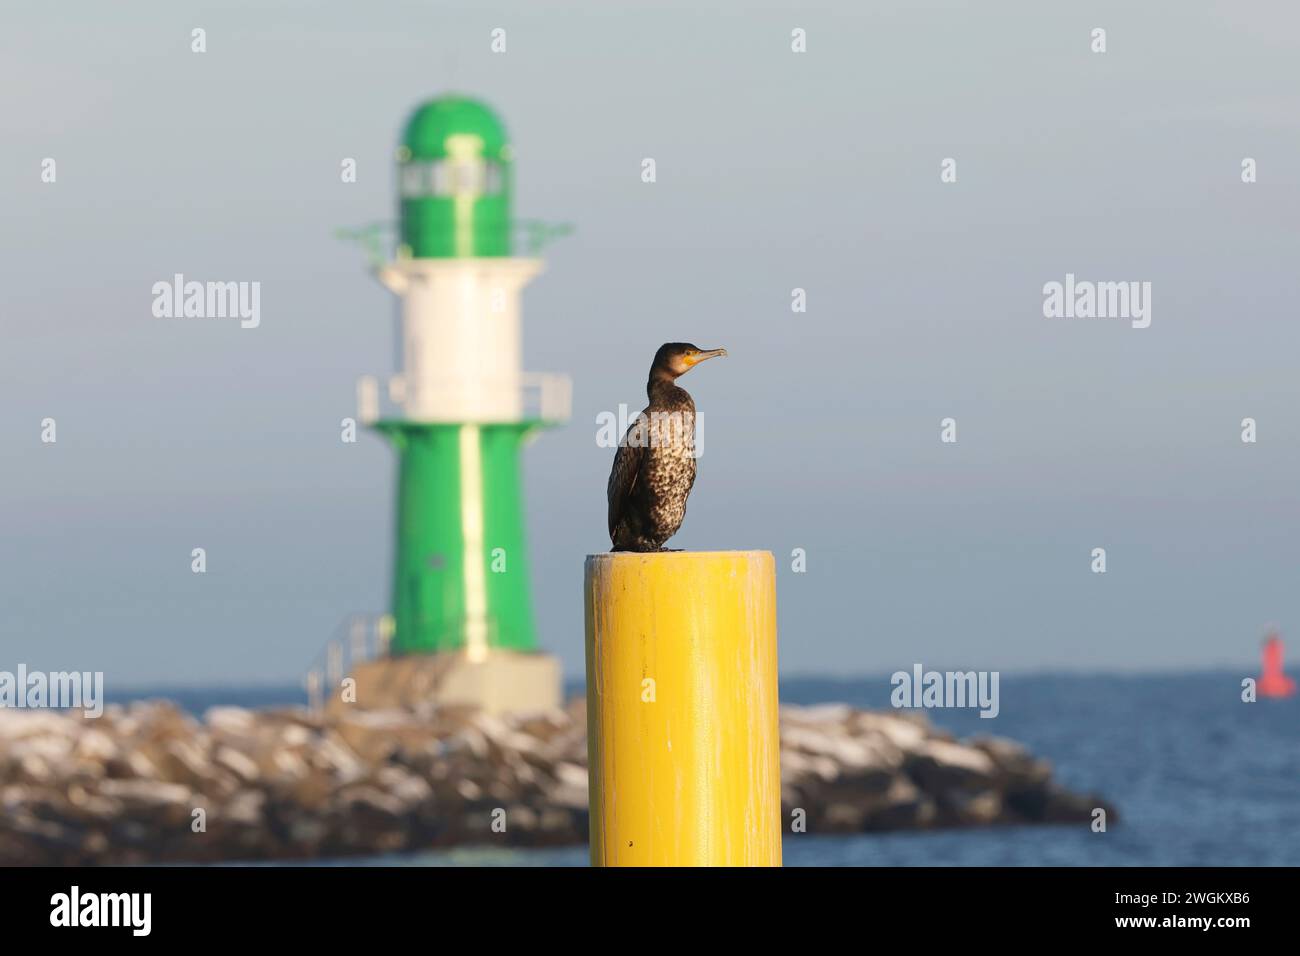 great cormorant (Phalacrocorax carbo), sits on a post at the pier light Molenfeuer of Warnemuende, Germany, Mecklenburg-Western Pomerania, Warnemuende Stock Photo